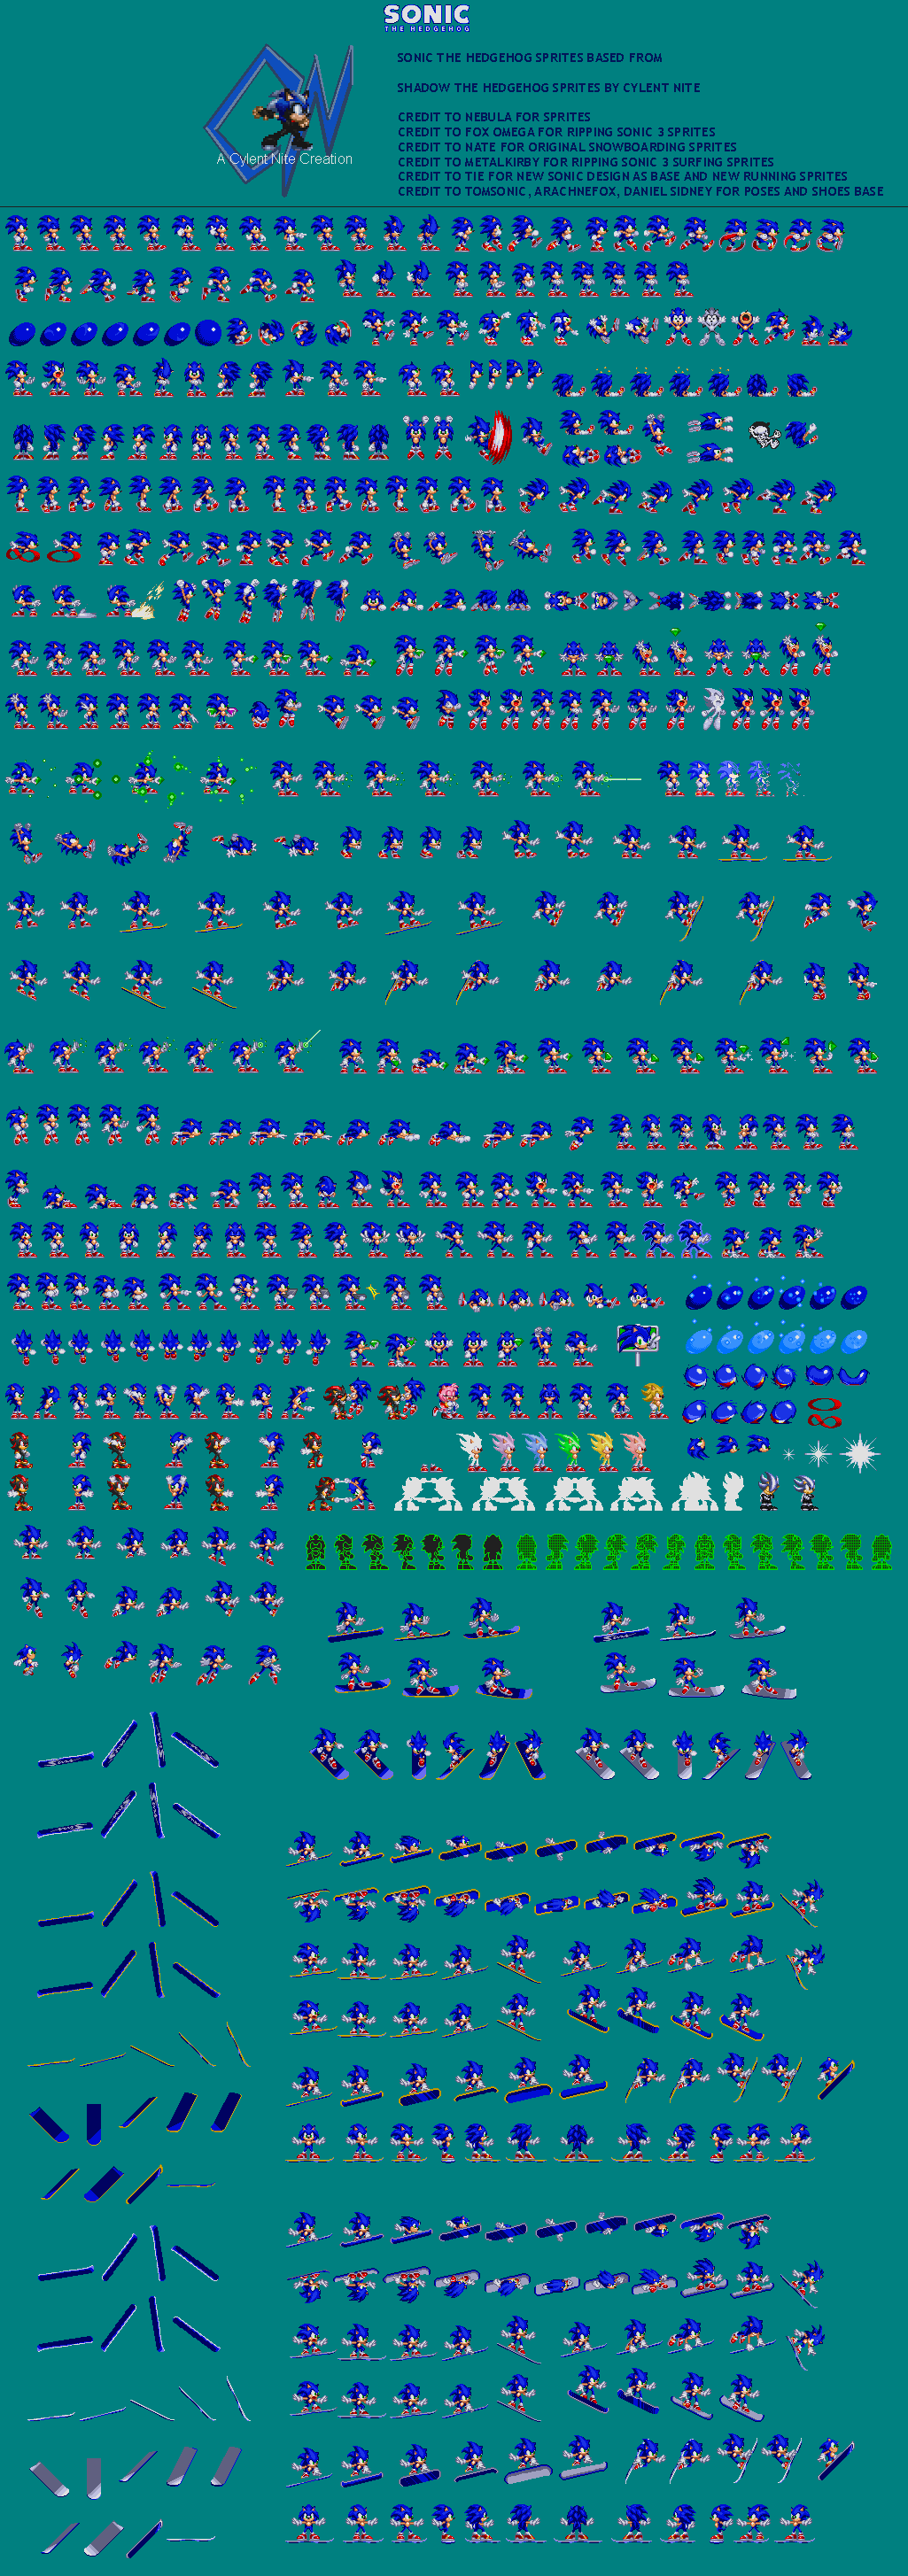 porting sonic 3 sprites to sonic 1